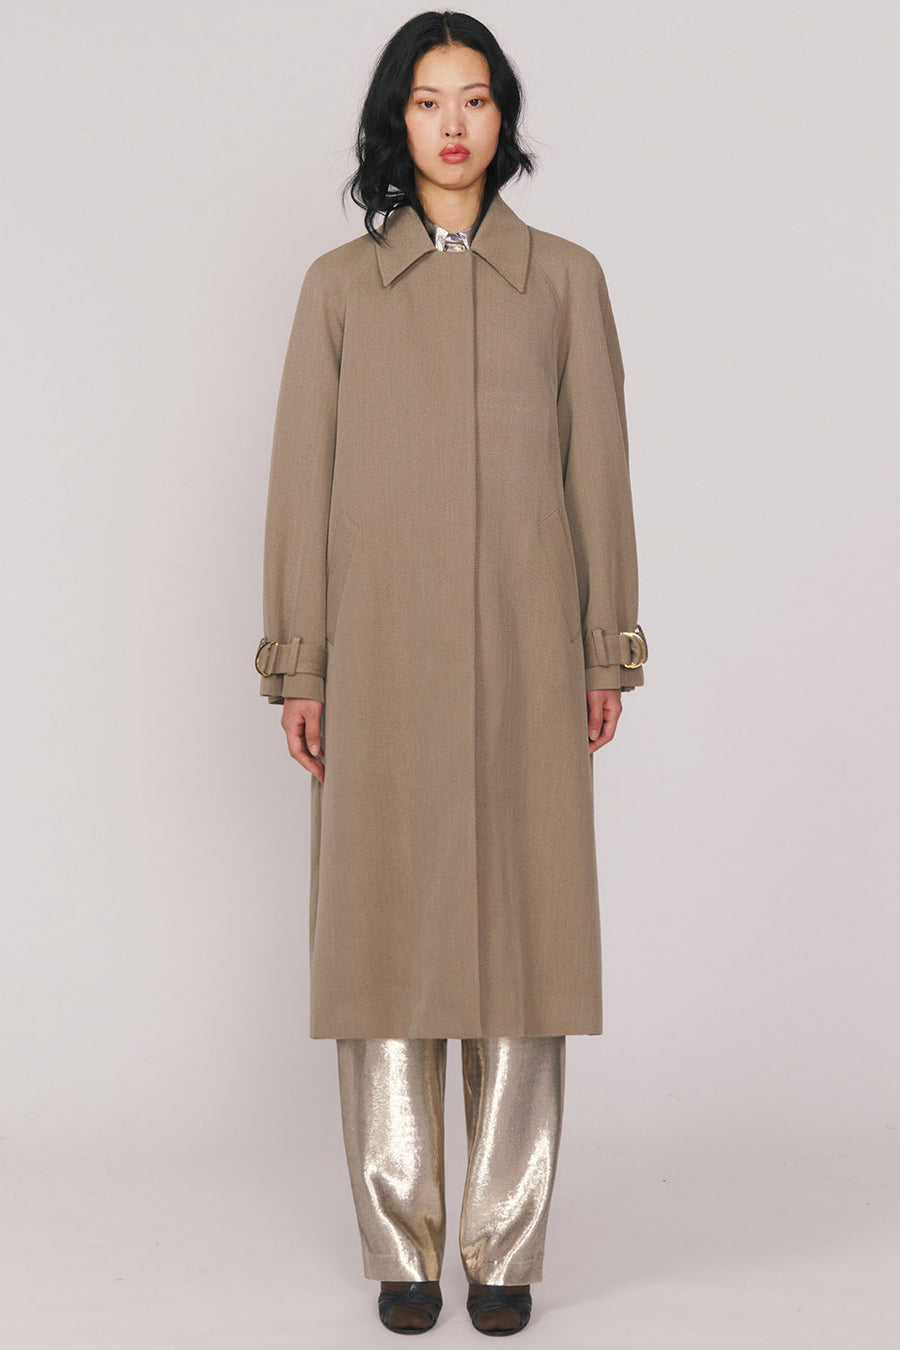 INDRESS - Trench Coat Jean Genie